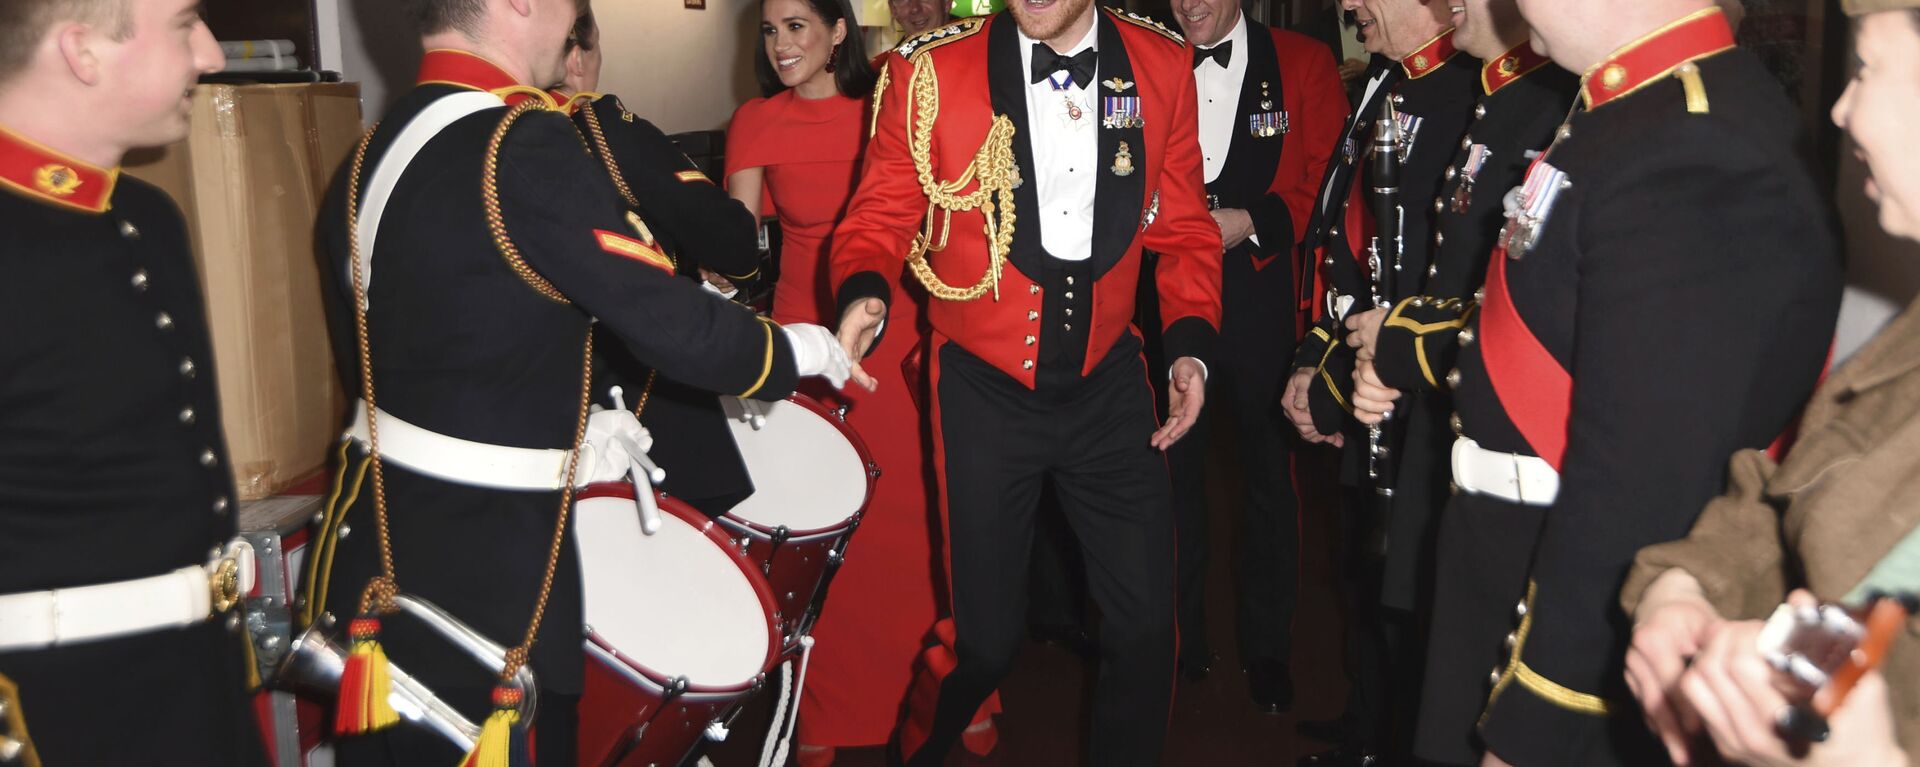 Britain's Prince Harry and Meghan, Duchess of Sussex, meet the Massed Bands of Her Majesty's Royal Marines at the Mountbatten Festival of Music at the Royal Albert Hall in London, Saturday, March 7, 2020 - Sputnik International, 1920, 18.06.2021